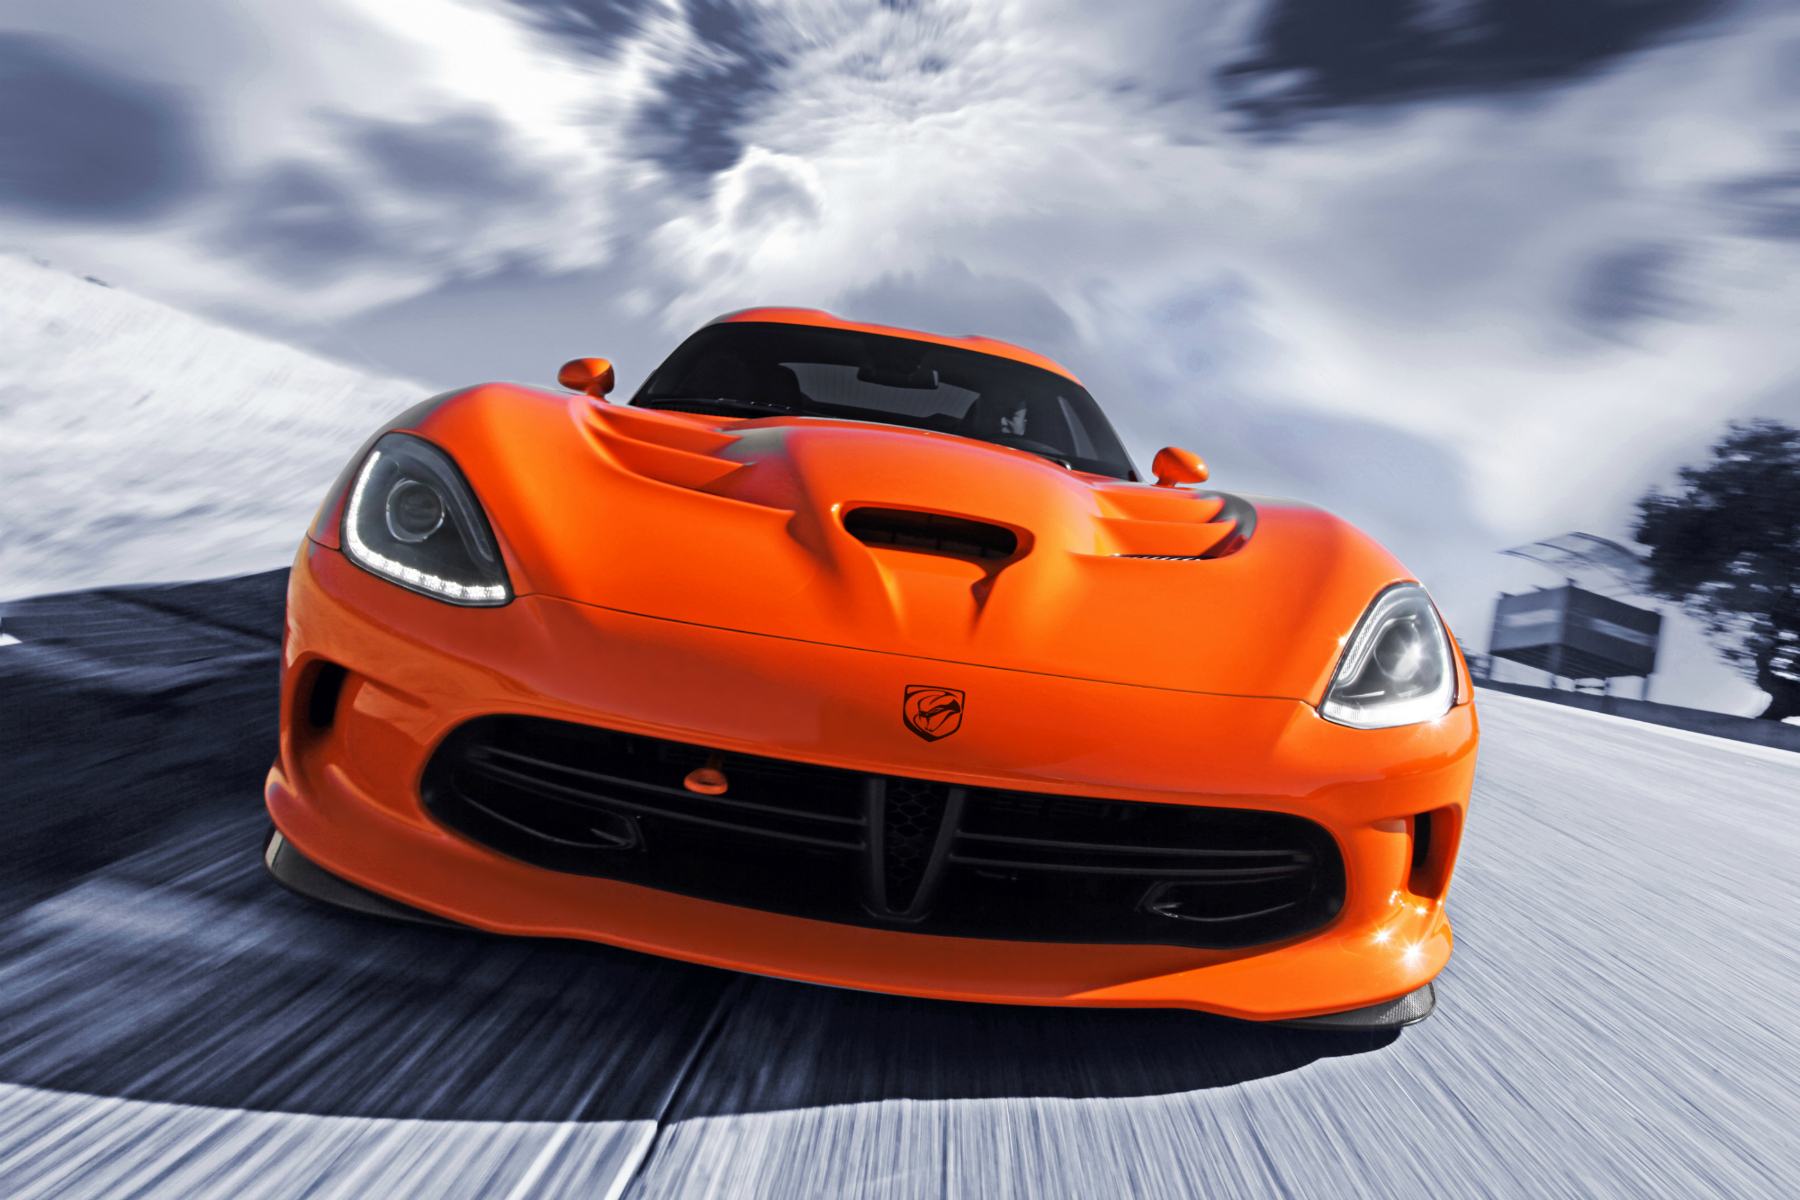 2014 SRT Viper TA – Ready to Attack Any Road Course